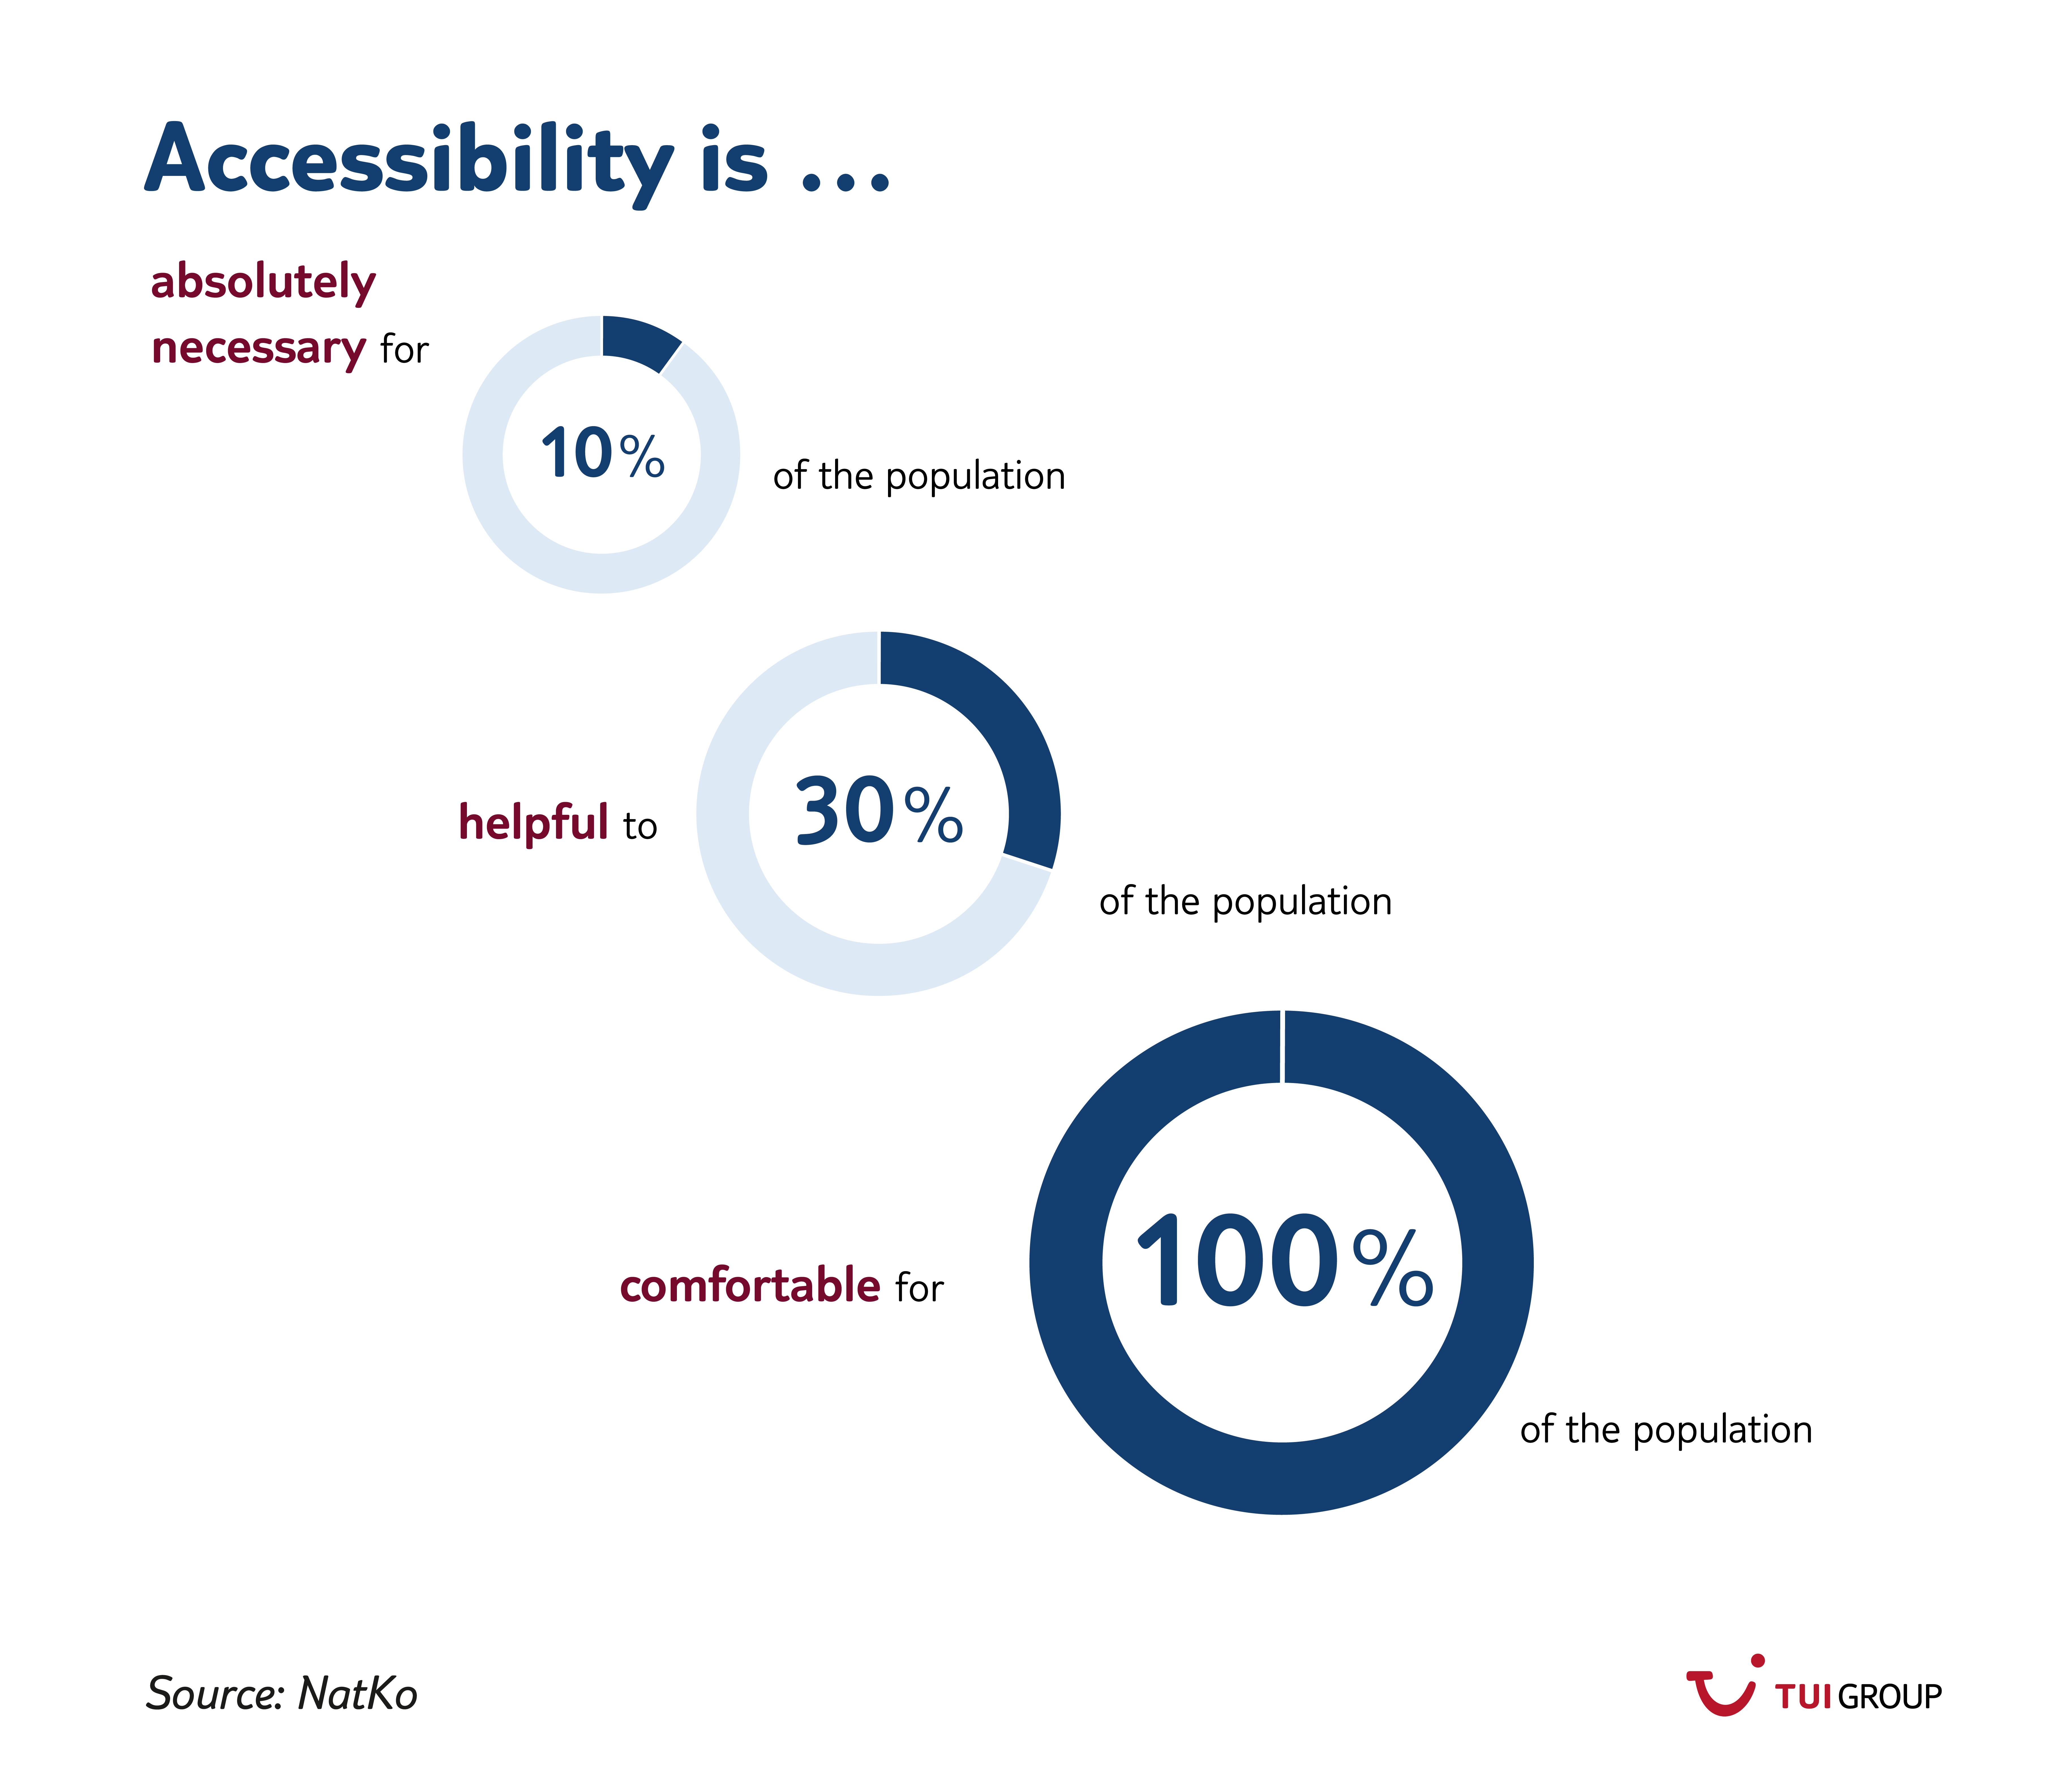 accessibility in tourism product